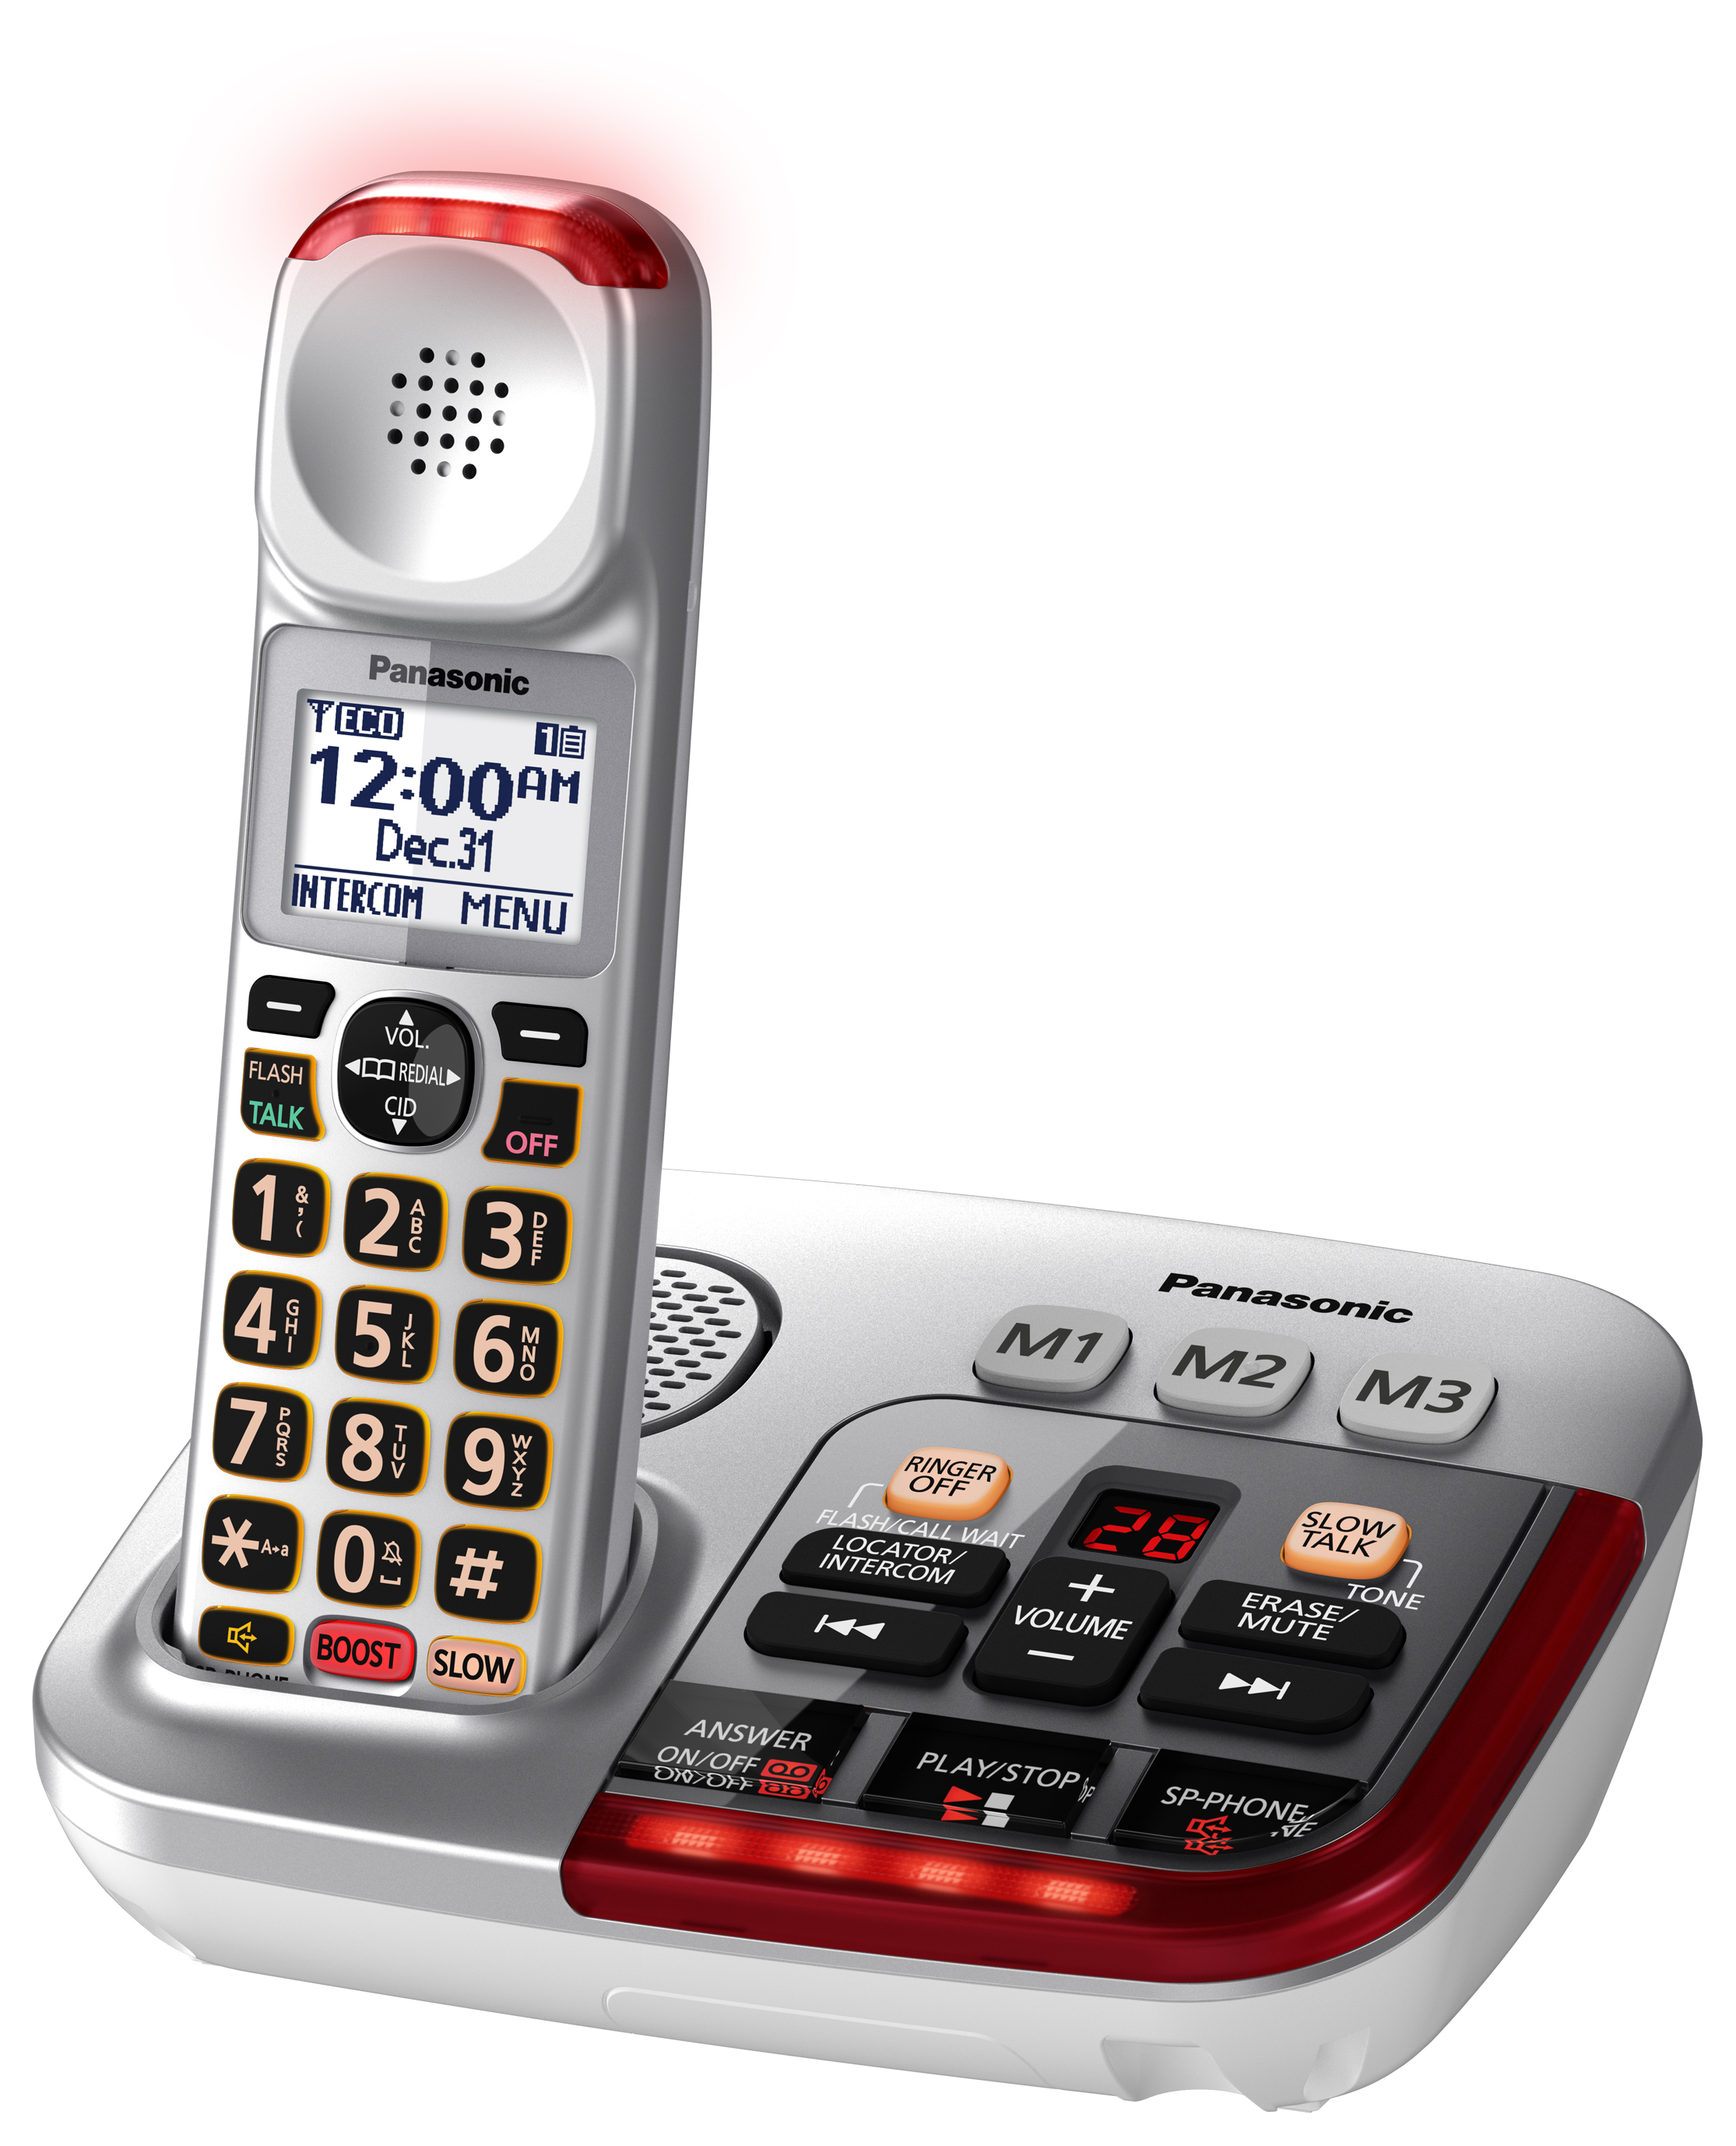 Panasonic's KX-TGM450S phone amplifies calls up to 50dB and has a loud ringer adjustable to 112dB. It also can slow down fast talkers in real time.